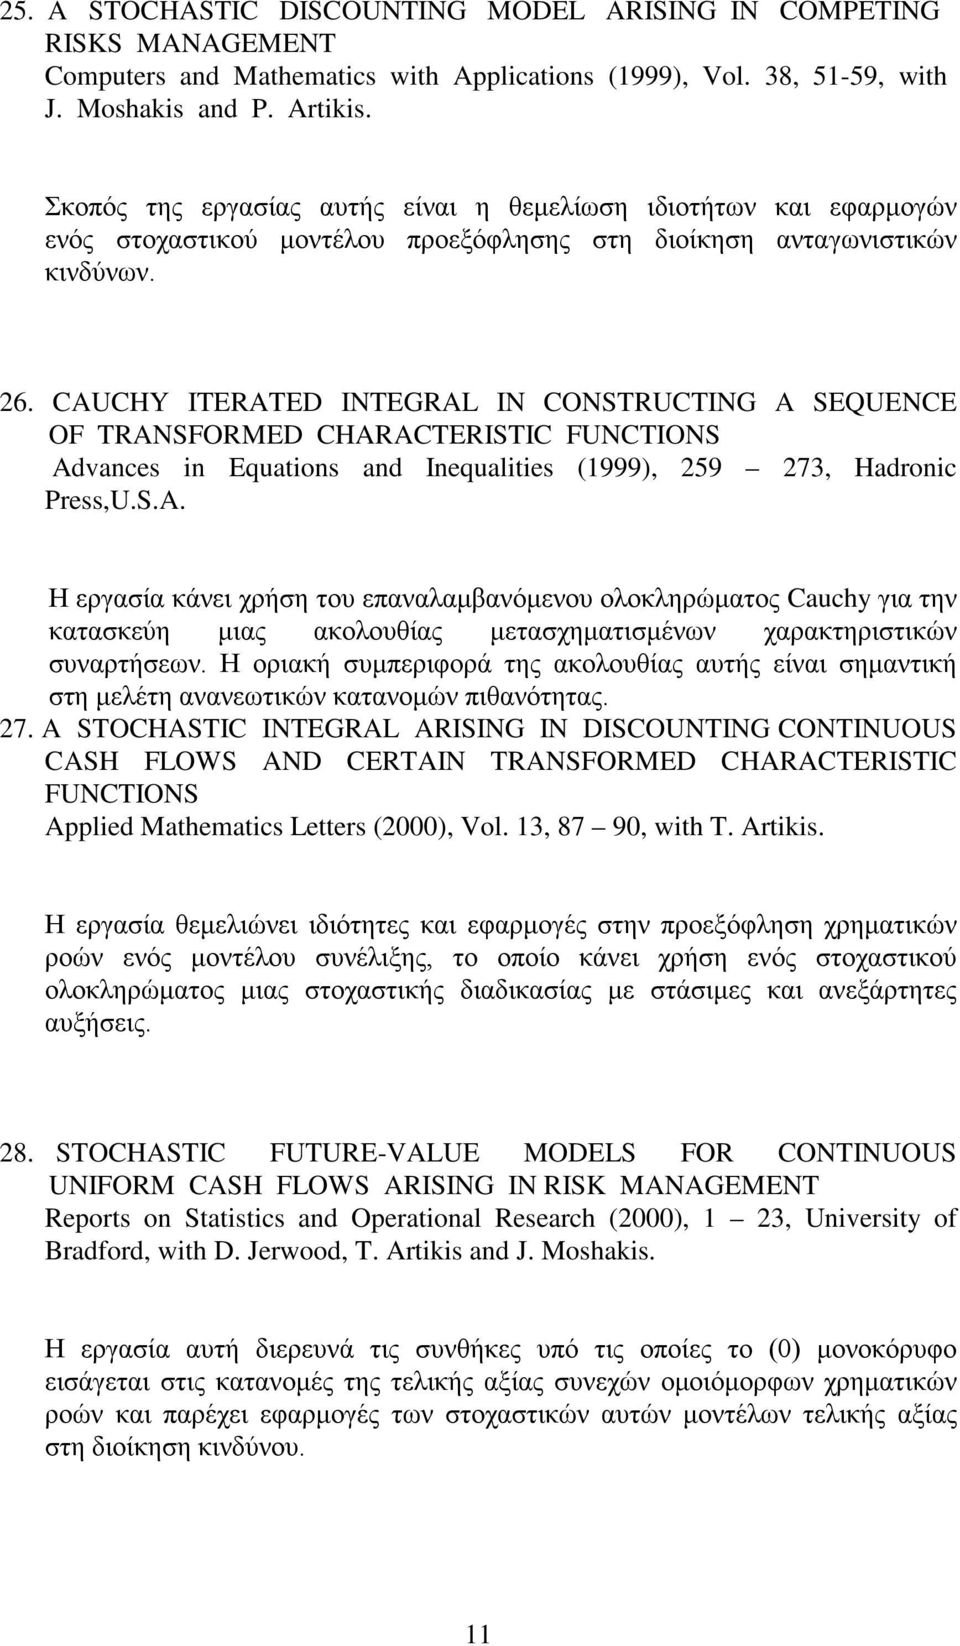 CAUCHY ITERATED INTEGRAL IN CONSTRUCTING A SEQUENCE OF TRANSFORMED CHARACTERISTIC FUNCTIONS Advances in Equations and Inequalities (1999), 259 273, Hadronic Press,U.S.A. Η εργασία κάνει χρήση του επαναλαμβανόμενου ολοκληρώματος Cauchy για την κατασκεύη μιας ακολουθίας μετασχηματισμένων χαρακτηριστικών συναρτήσεων.